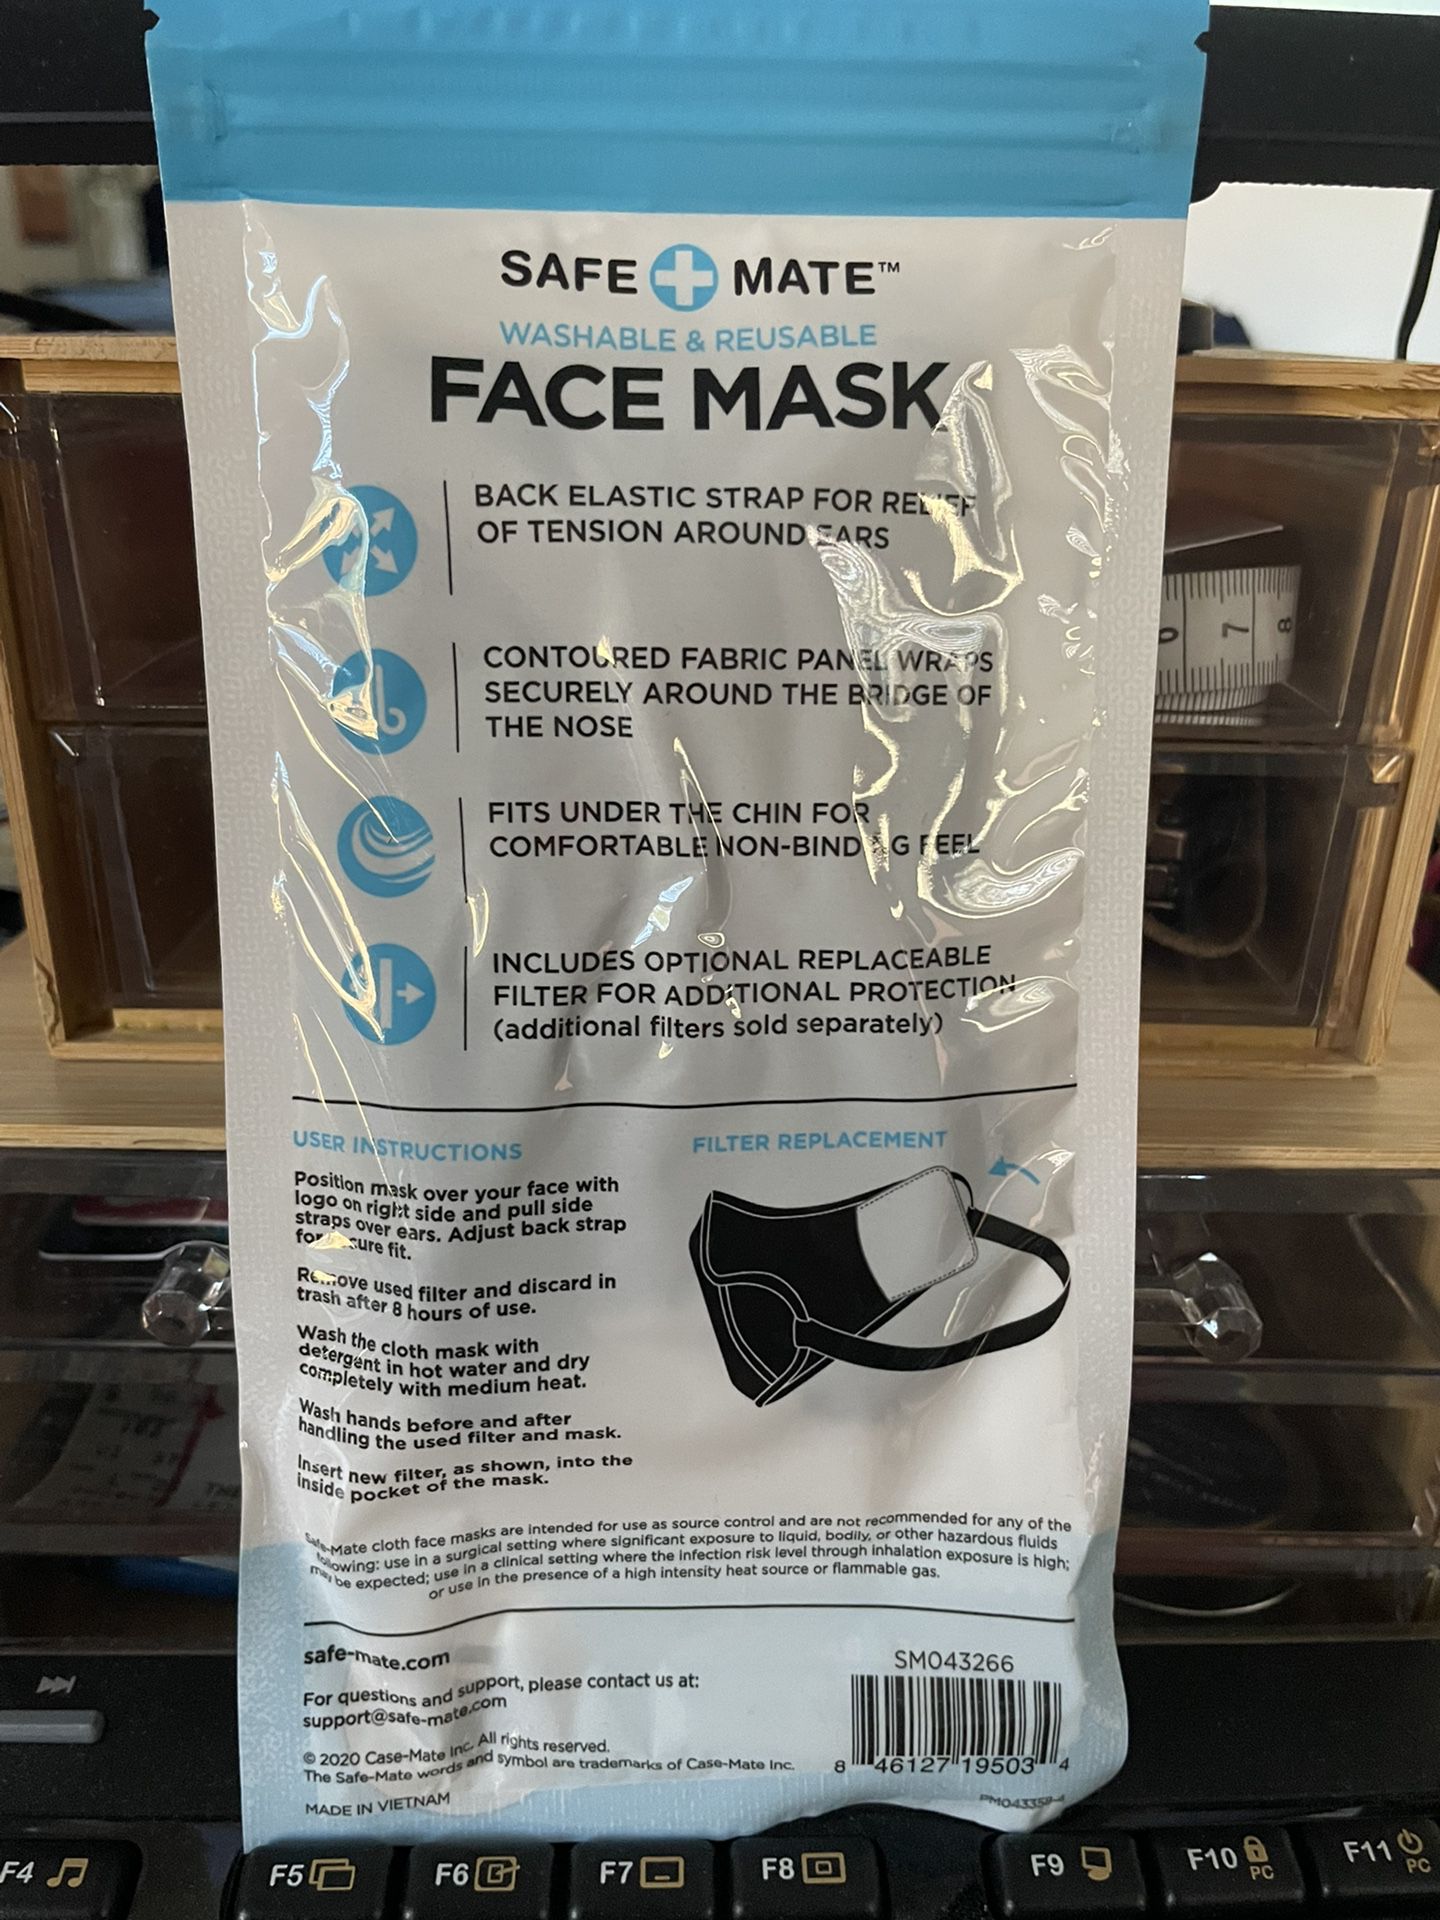 Safe+Mate Washable & Reusable Face Mask - Black - S/M (Not for Medical Use)